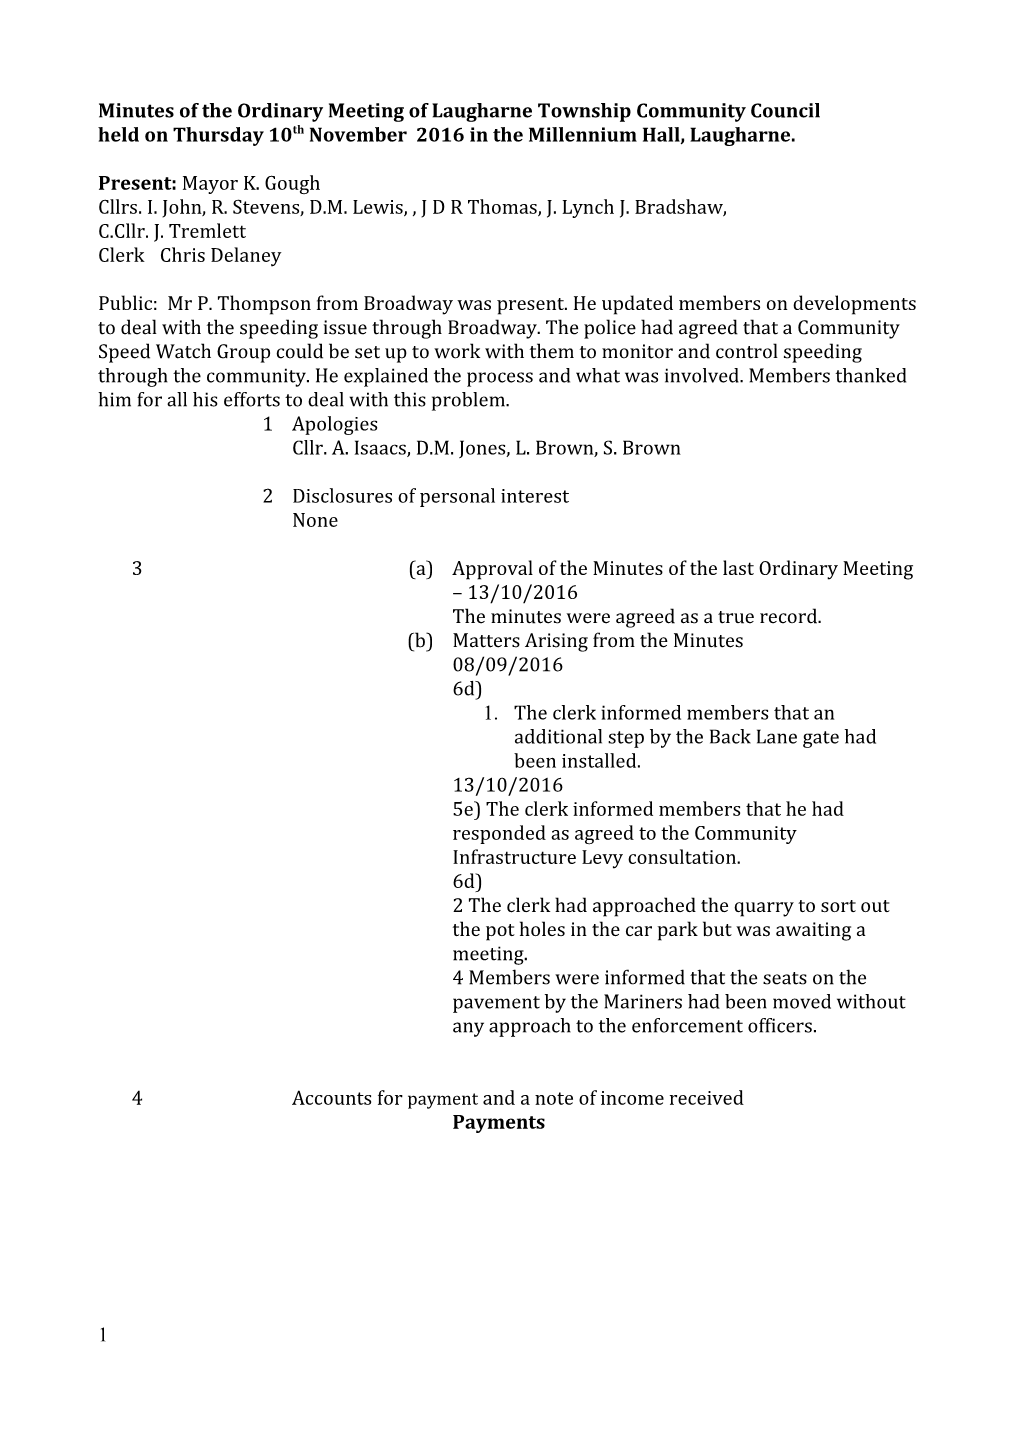 Minutes of the Ordinary Meeting of Laugharne Township Community Council s1